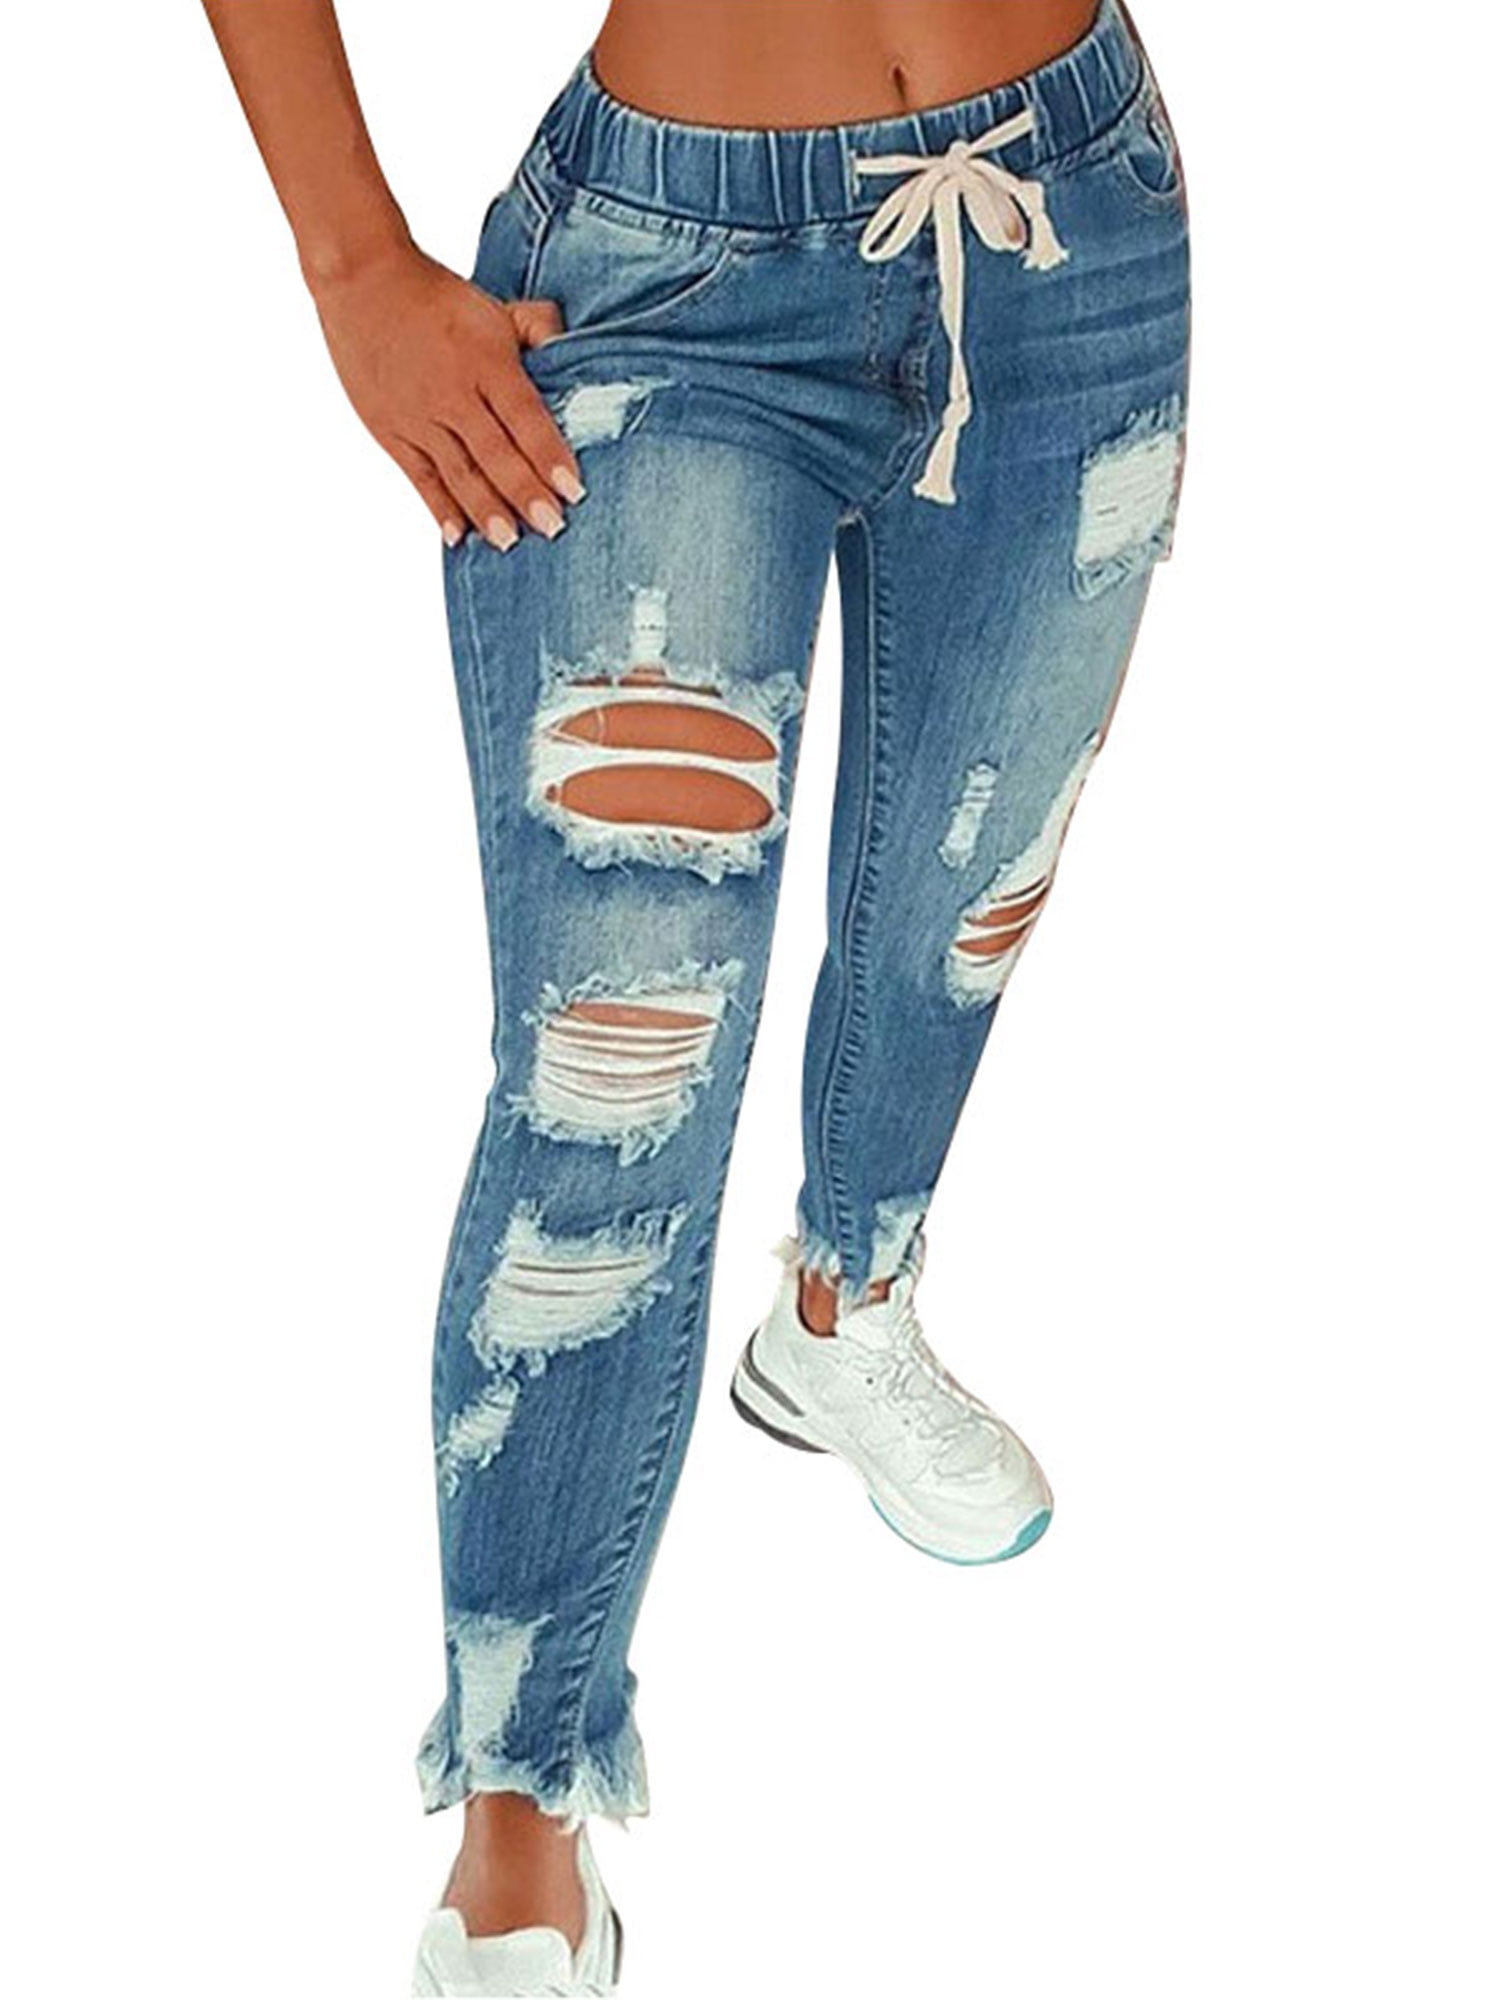 Women's Destroyed Ripped Distressed MID Waist Stretchy Skinny Denim Pants Jeans 